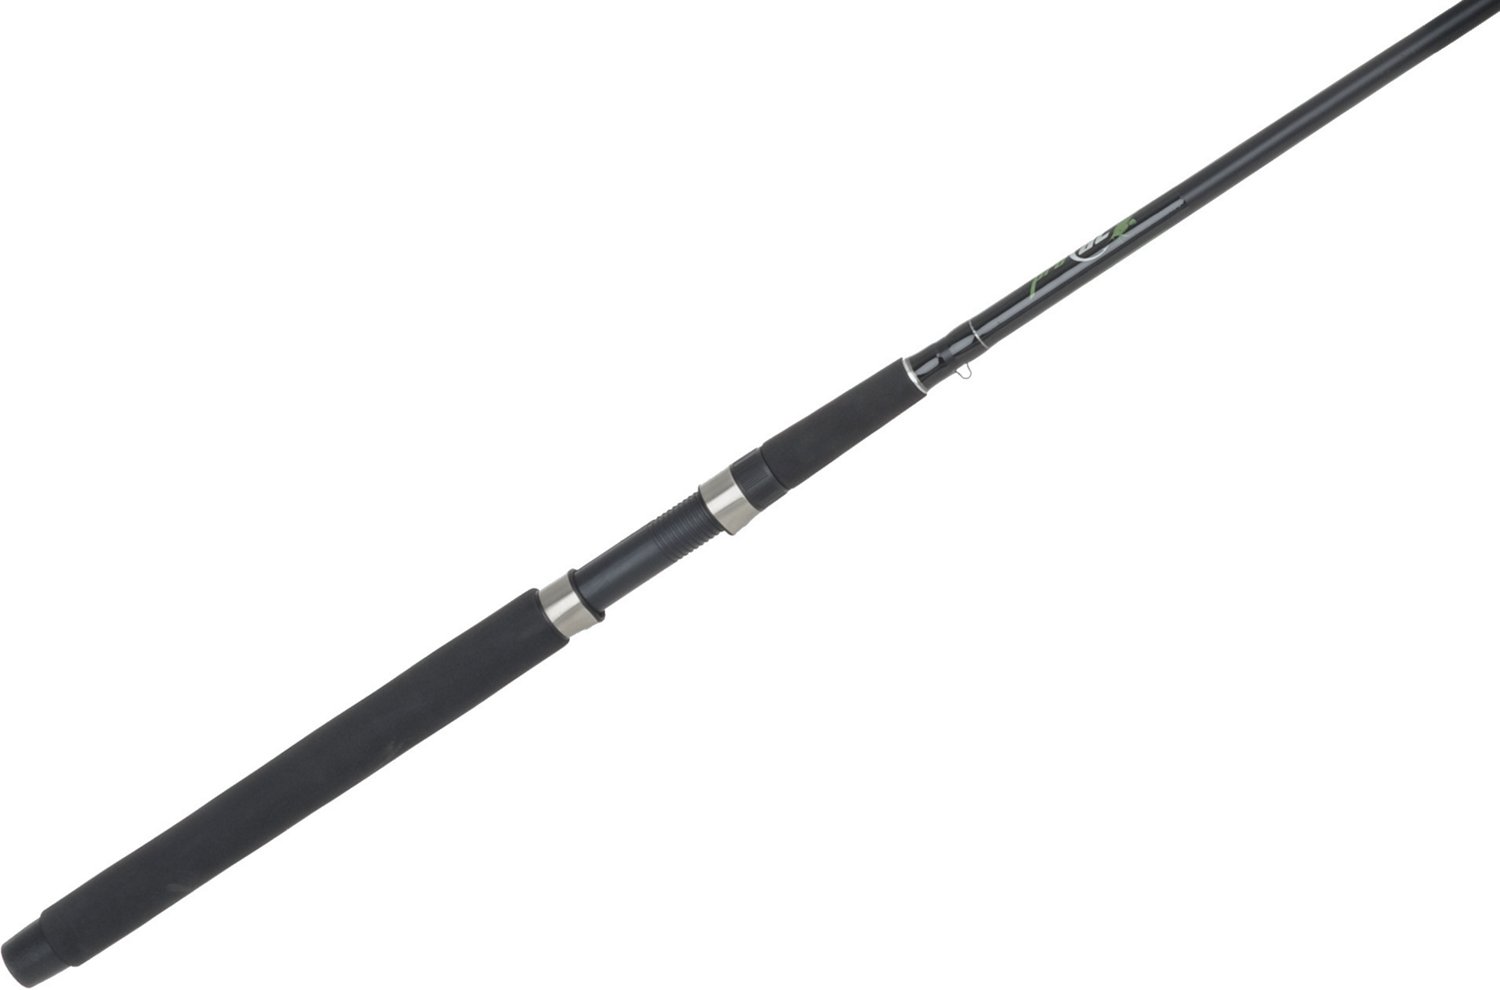 Academy Sports + Outdoors Pro Cat 7 ft Catfish Casting Rod and Reel Combo